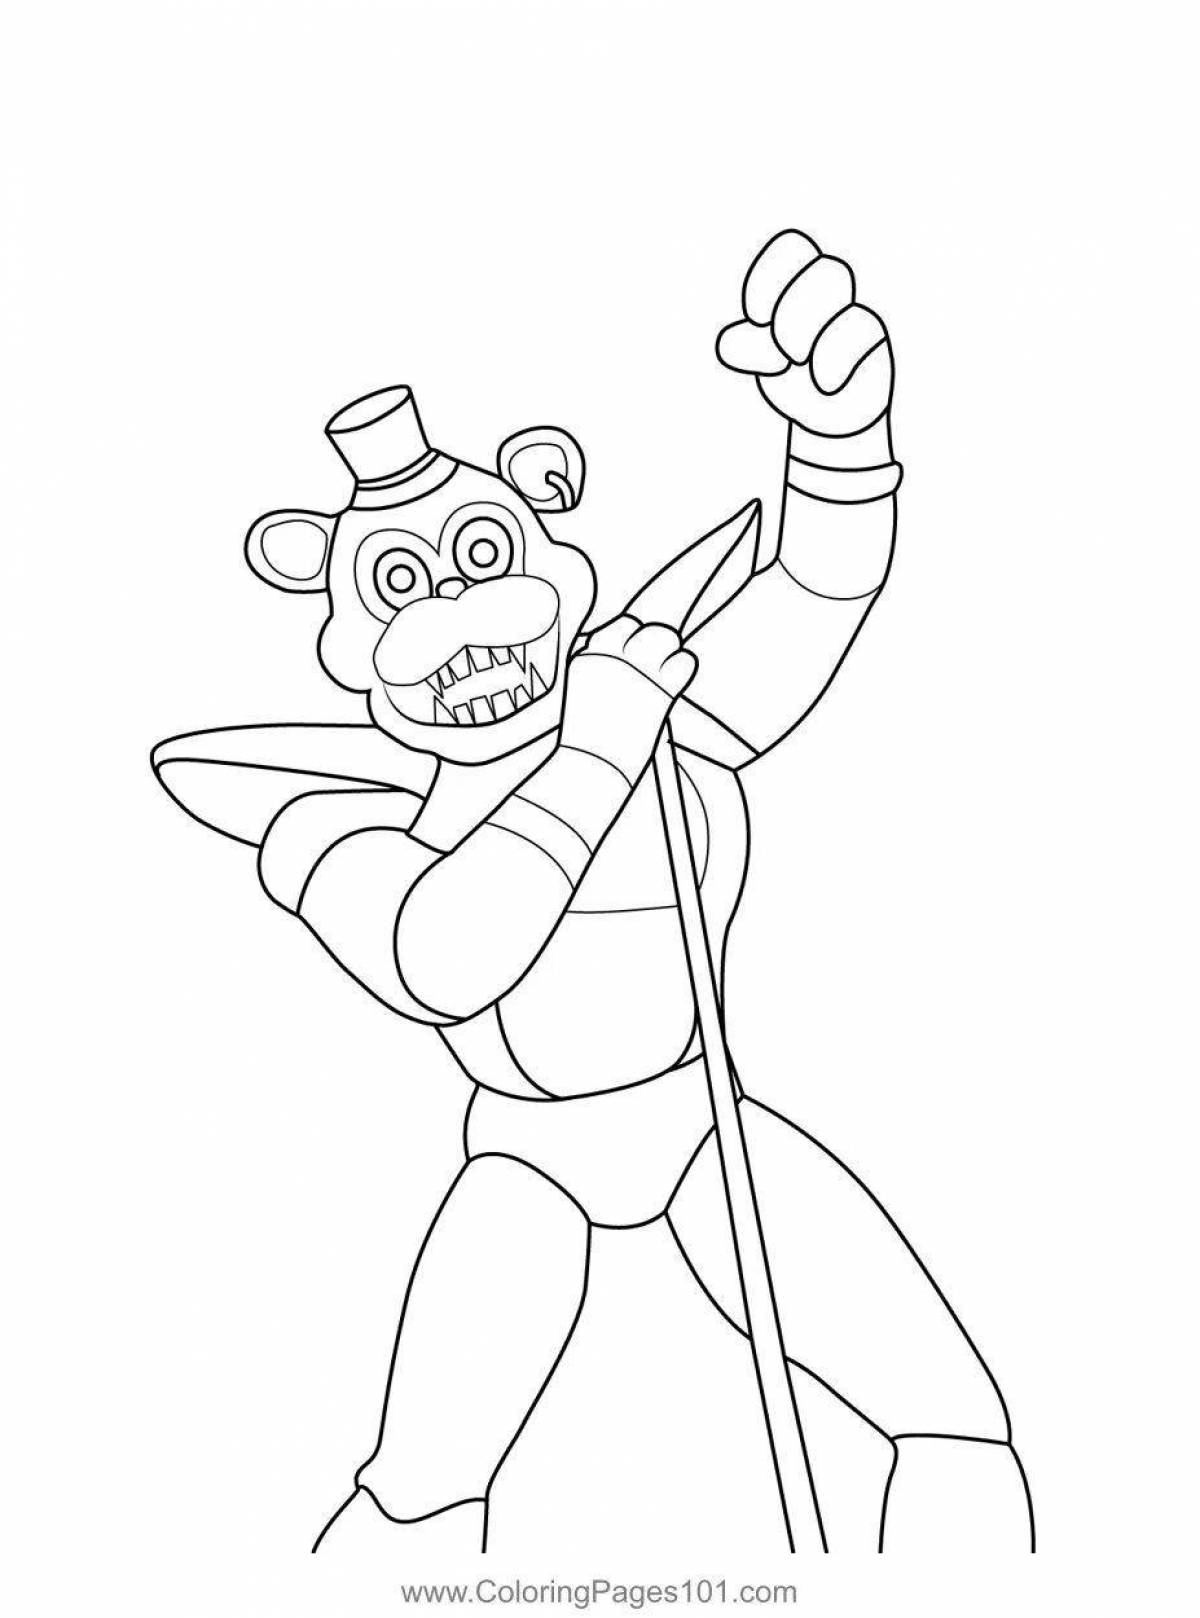 Coloring radiant fighttime freddy